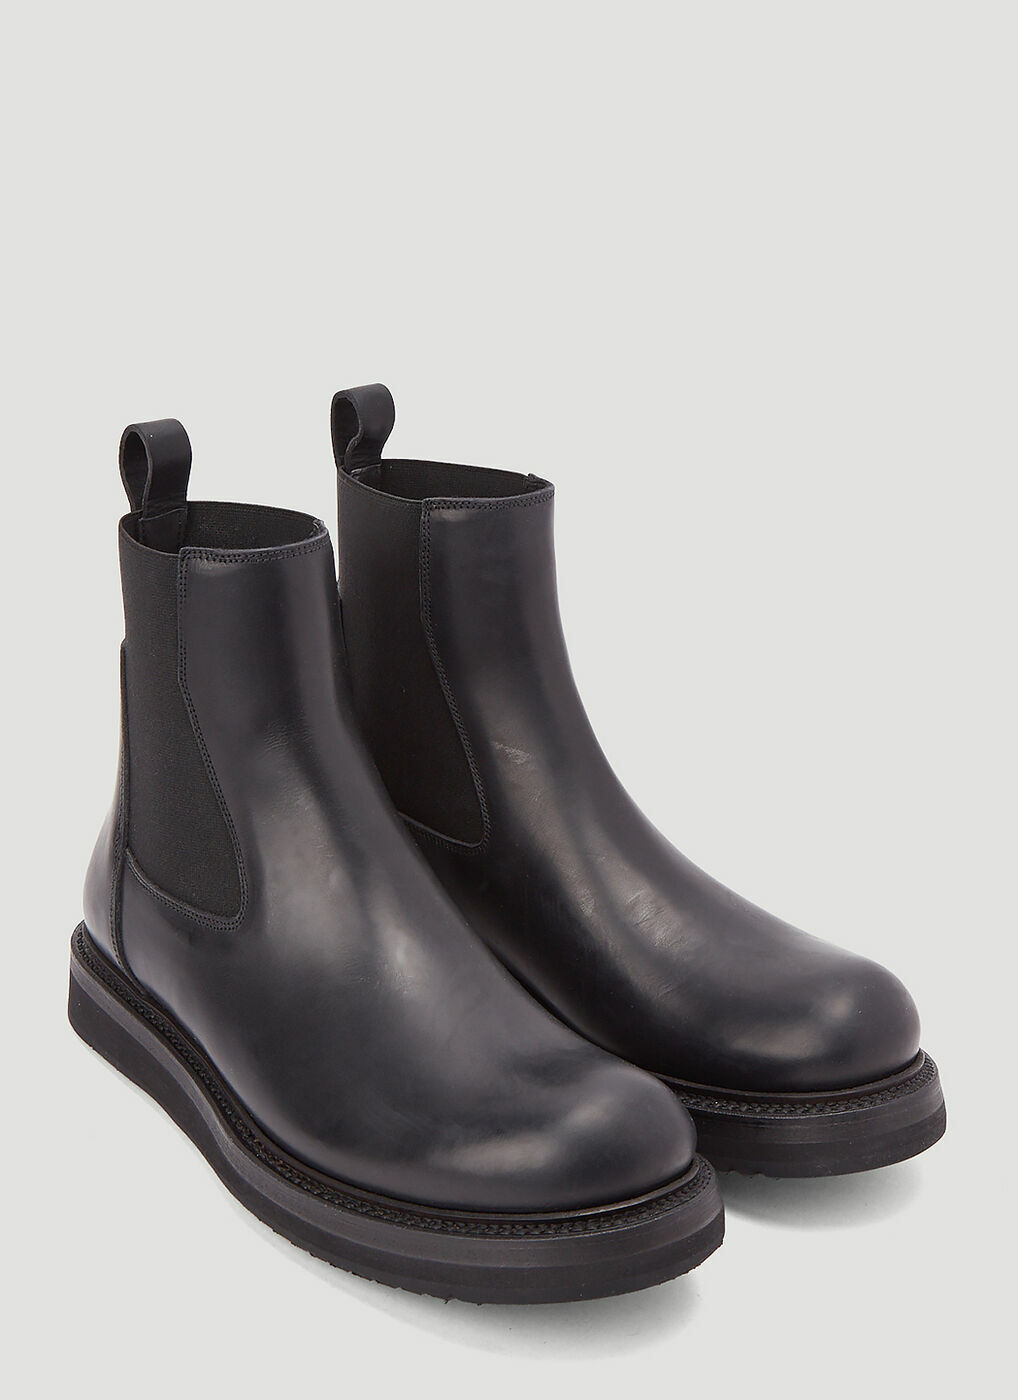 Beatle Creeper Boots in Black